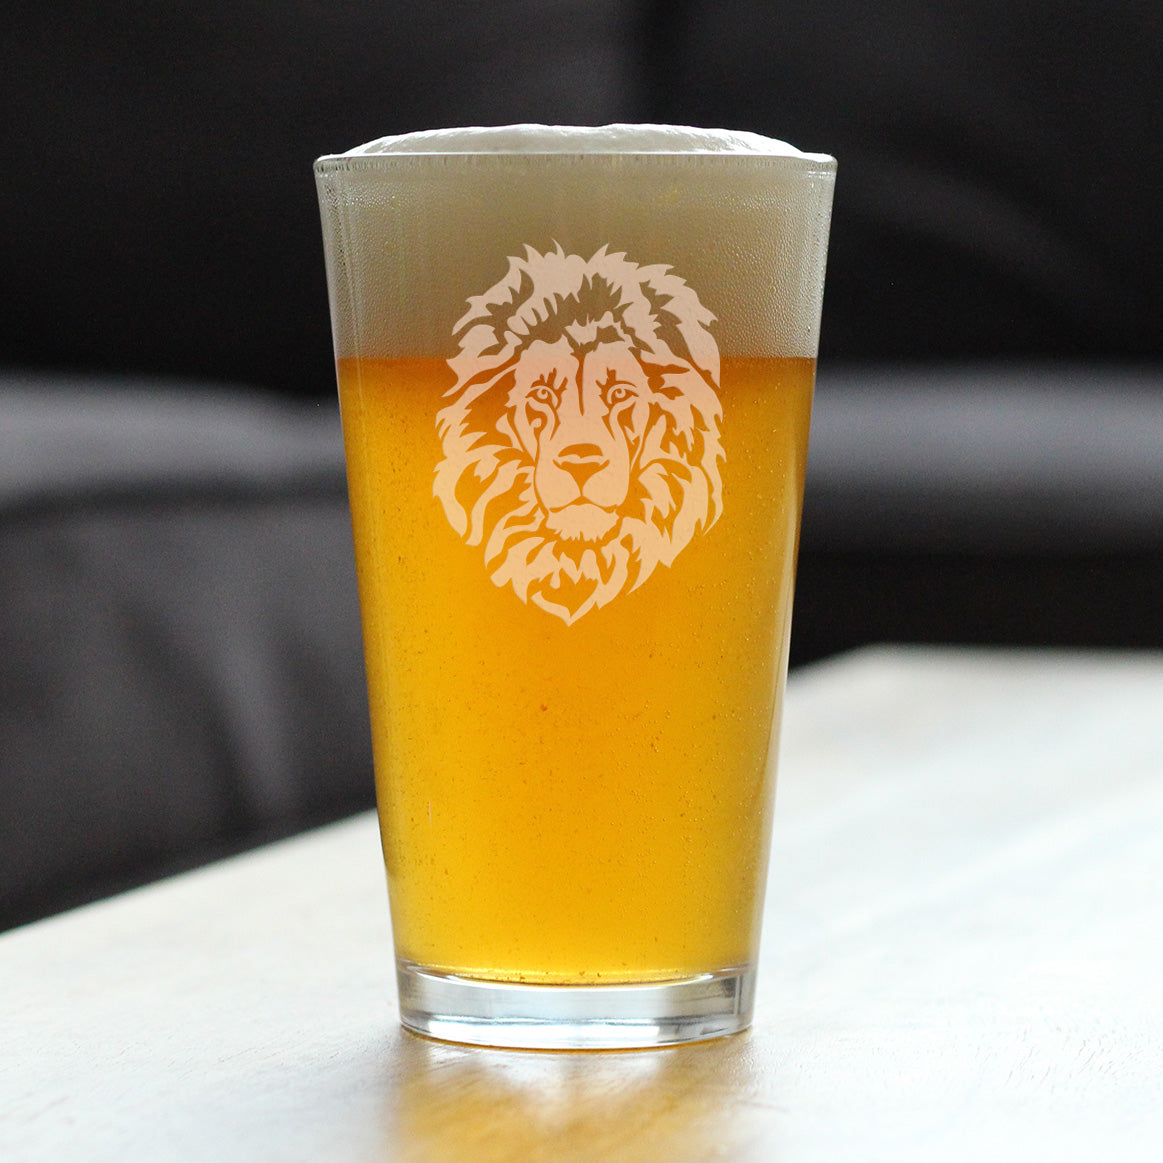 Lion Pint Glass for Beer - Fun Safari Themed Decor and Gifts for Lovers of African Wild Animals - 16 Oz Glasses